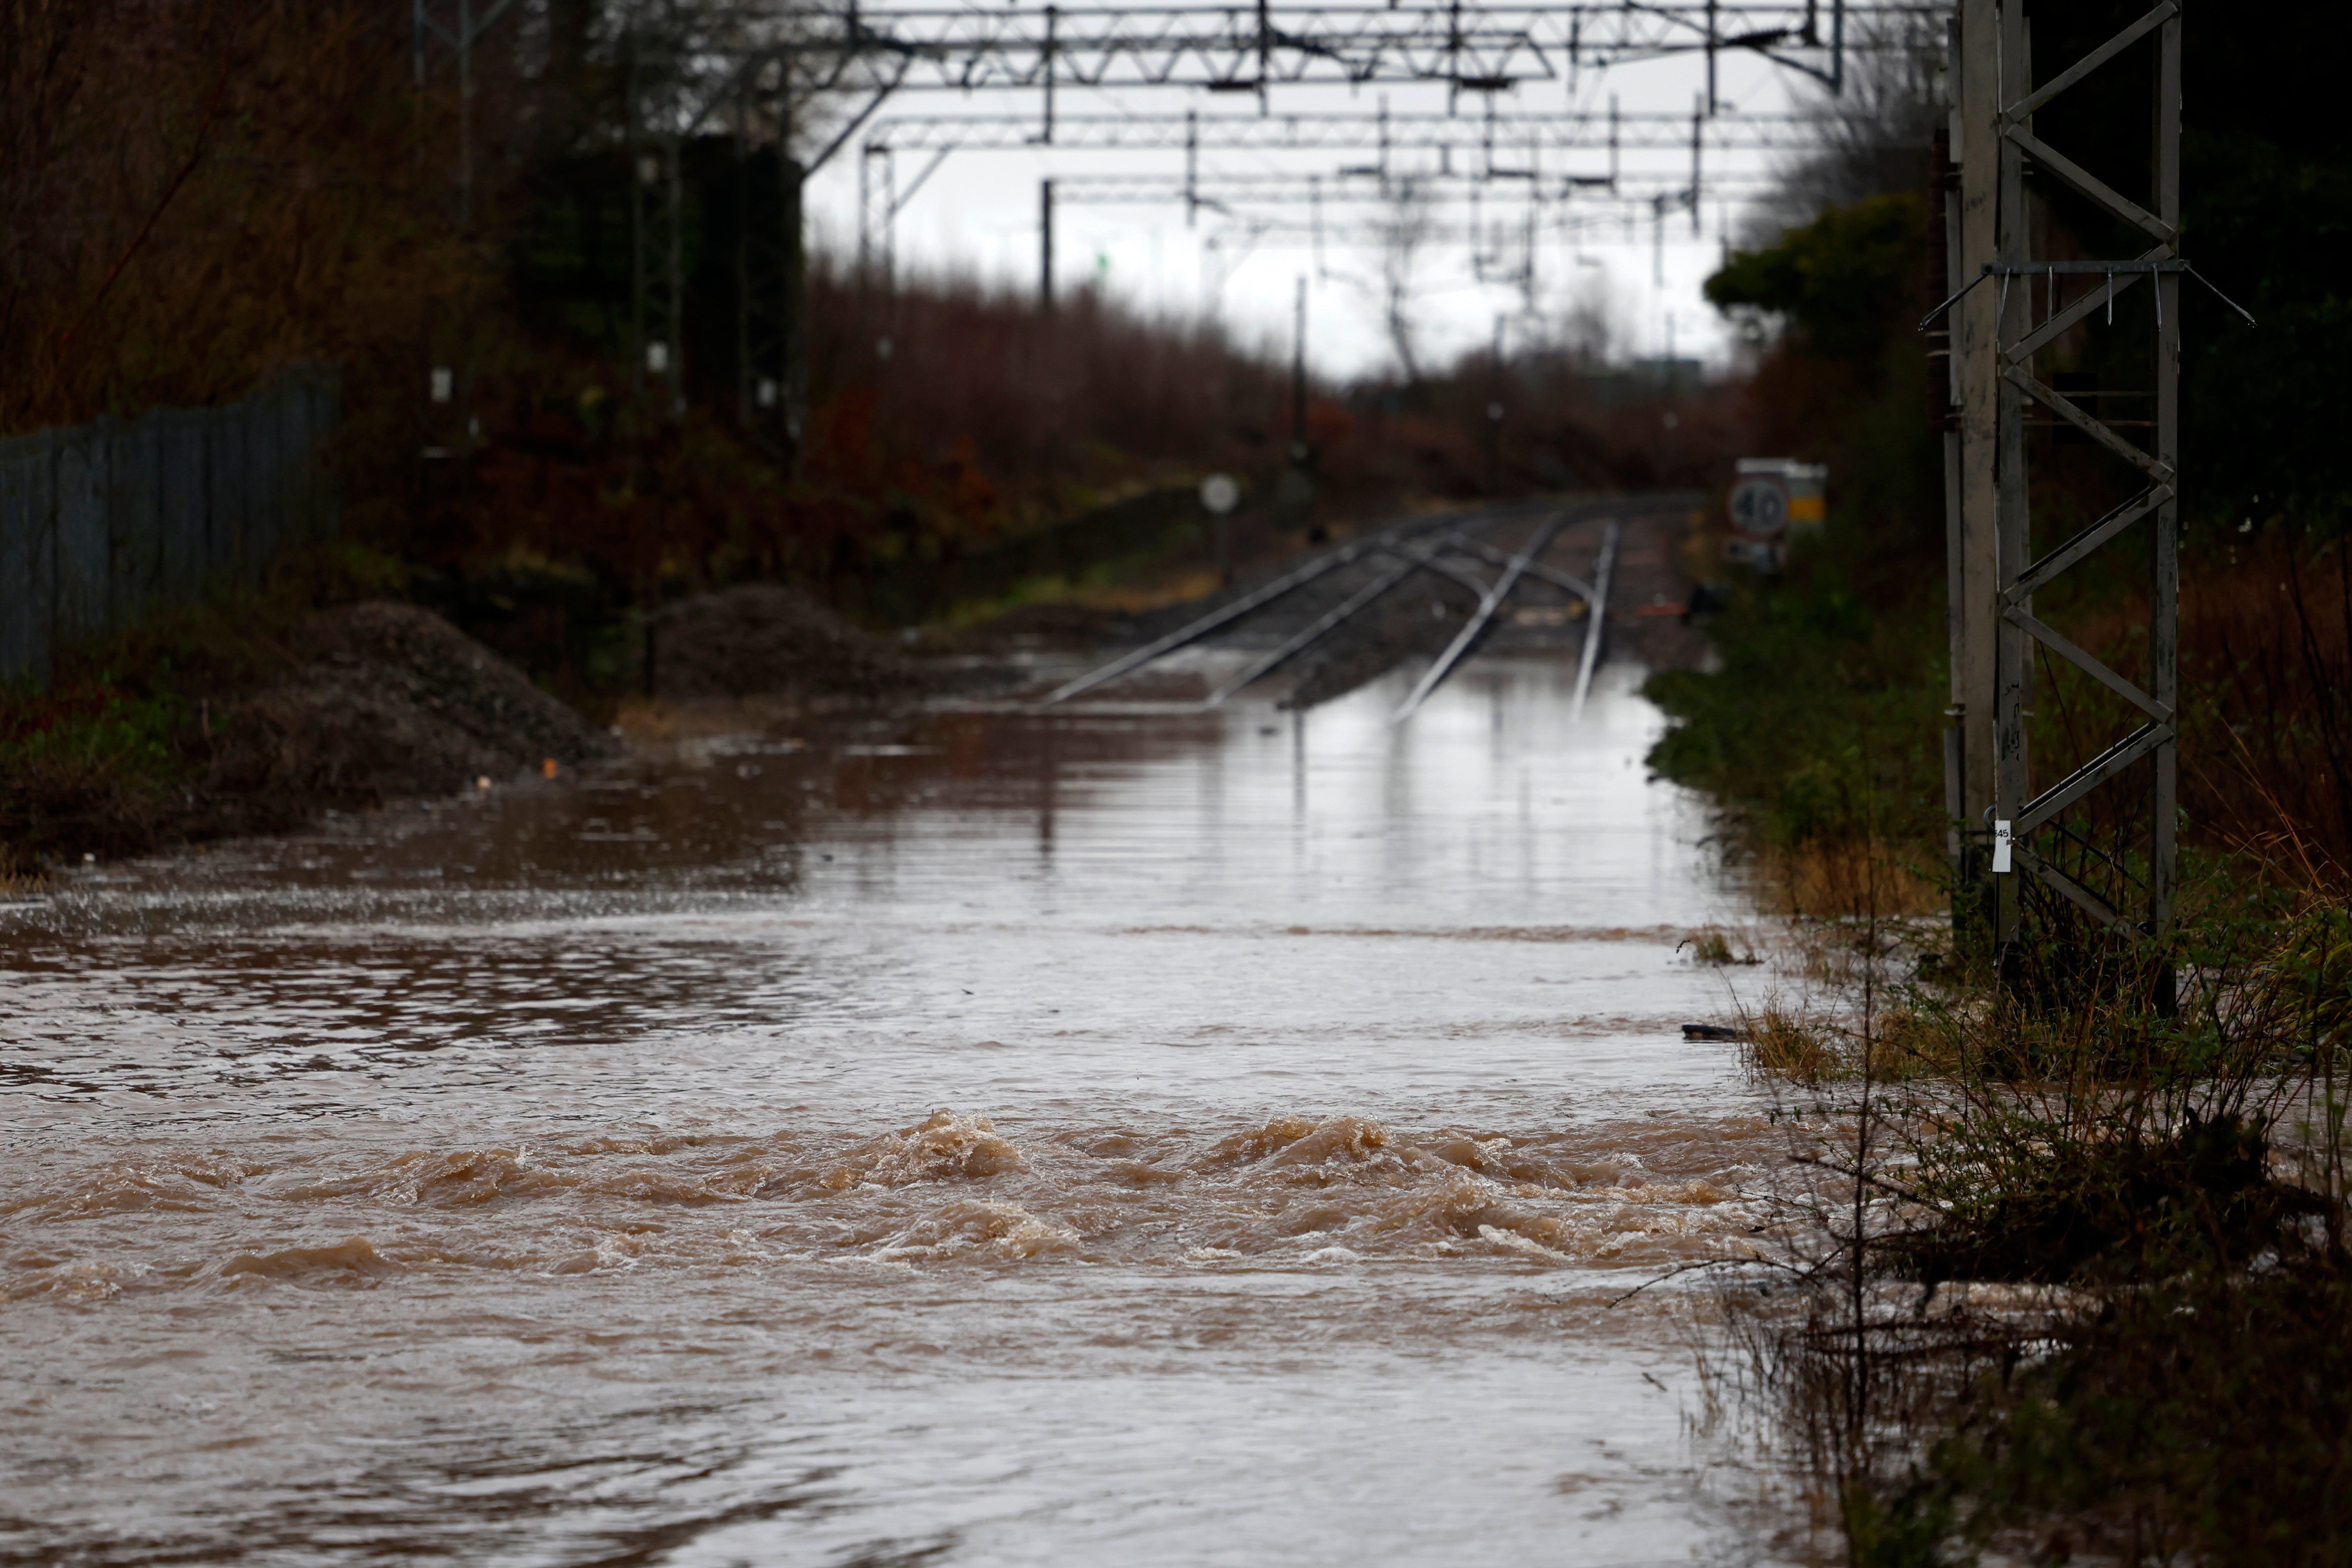 pThe railway line at Bowling station, West Dunbartonshire, was completely submerged /p